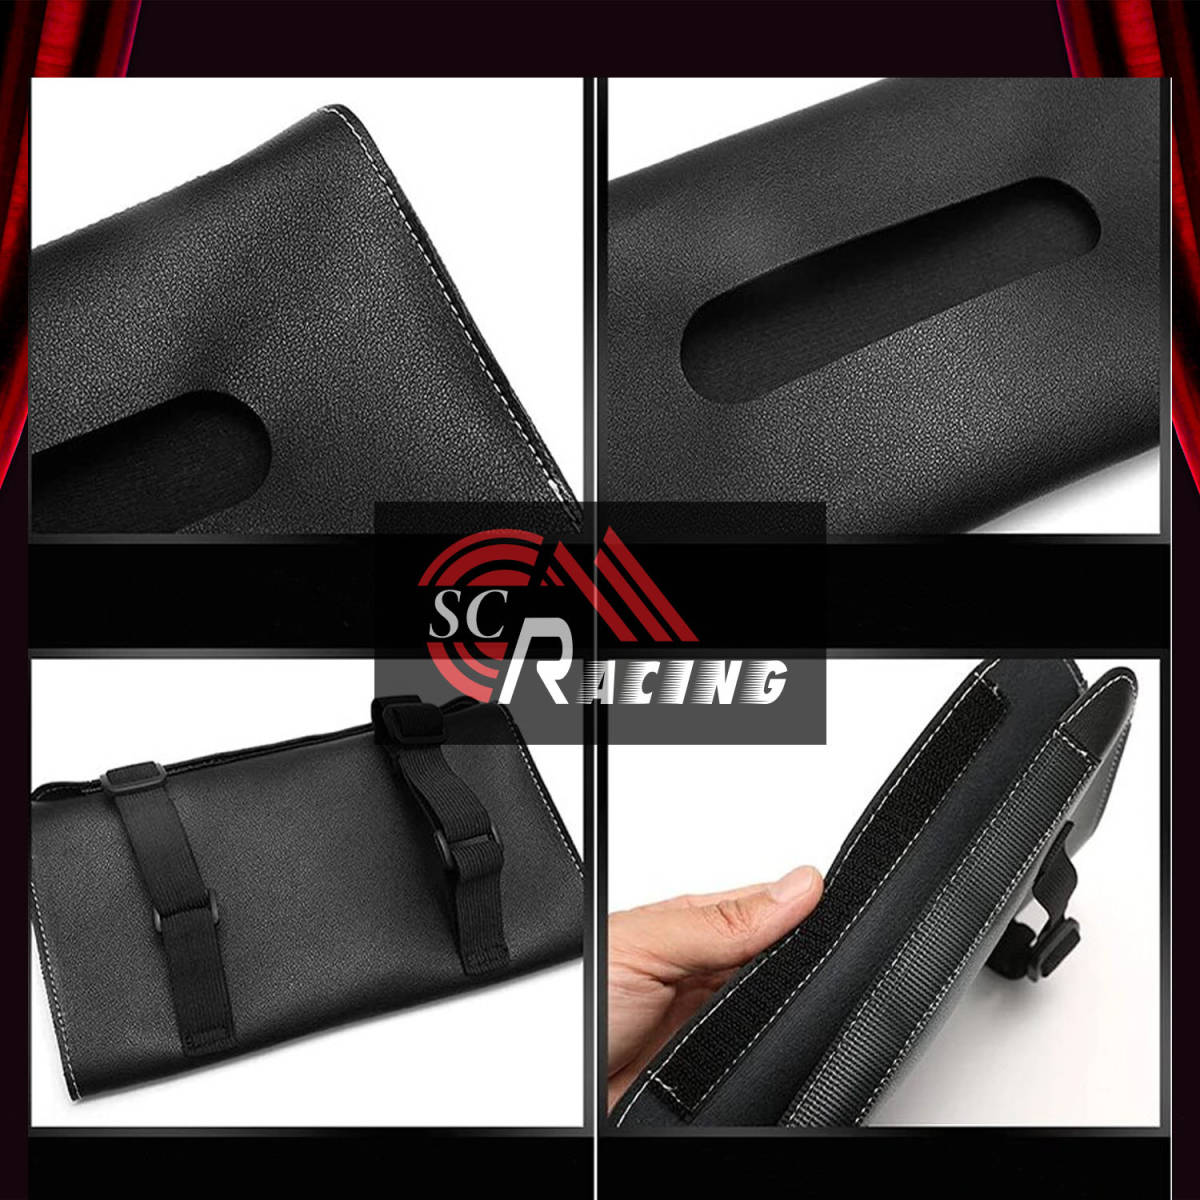 SC RACING tissue case cover PU leather tissue cover convenience goods refilling black car supplies accessory 